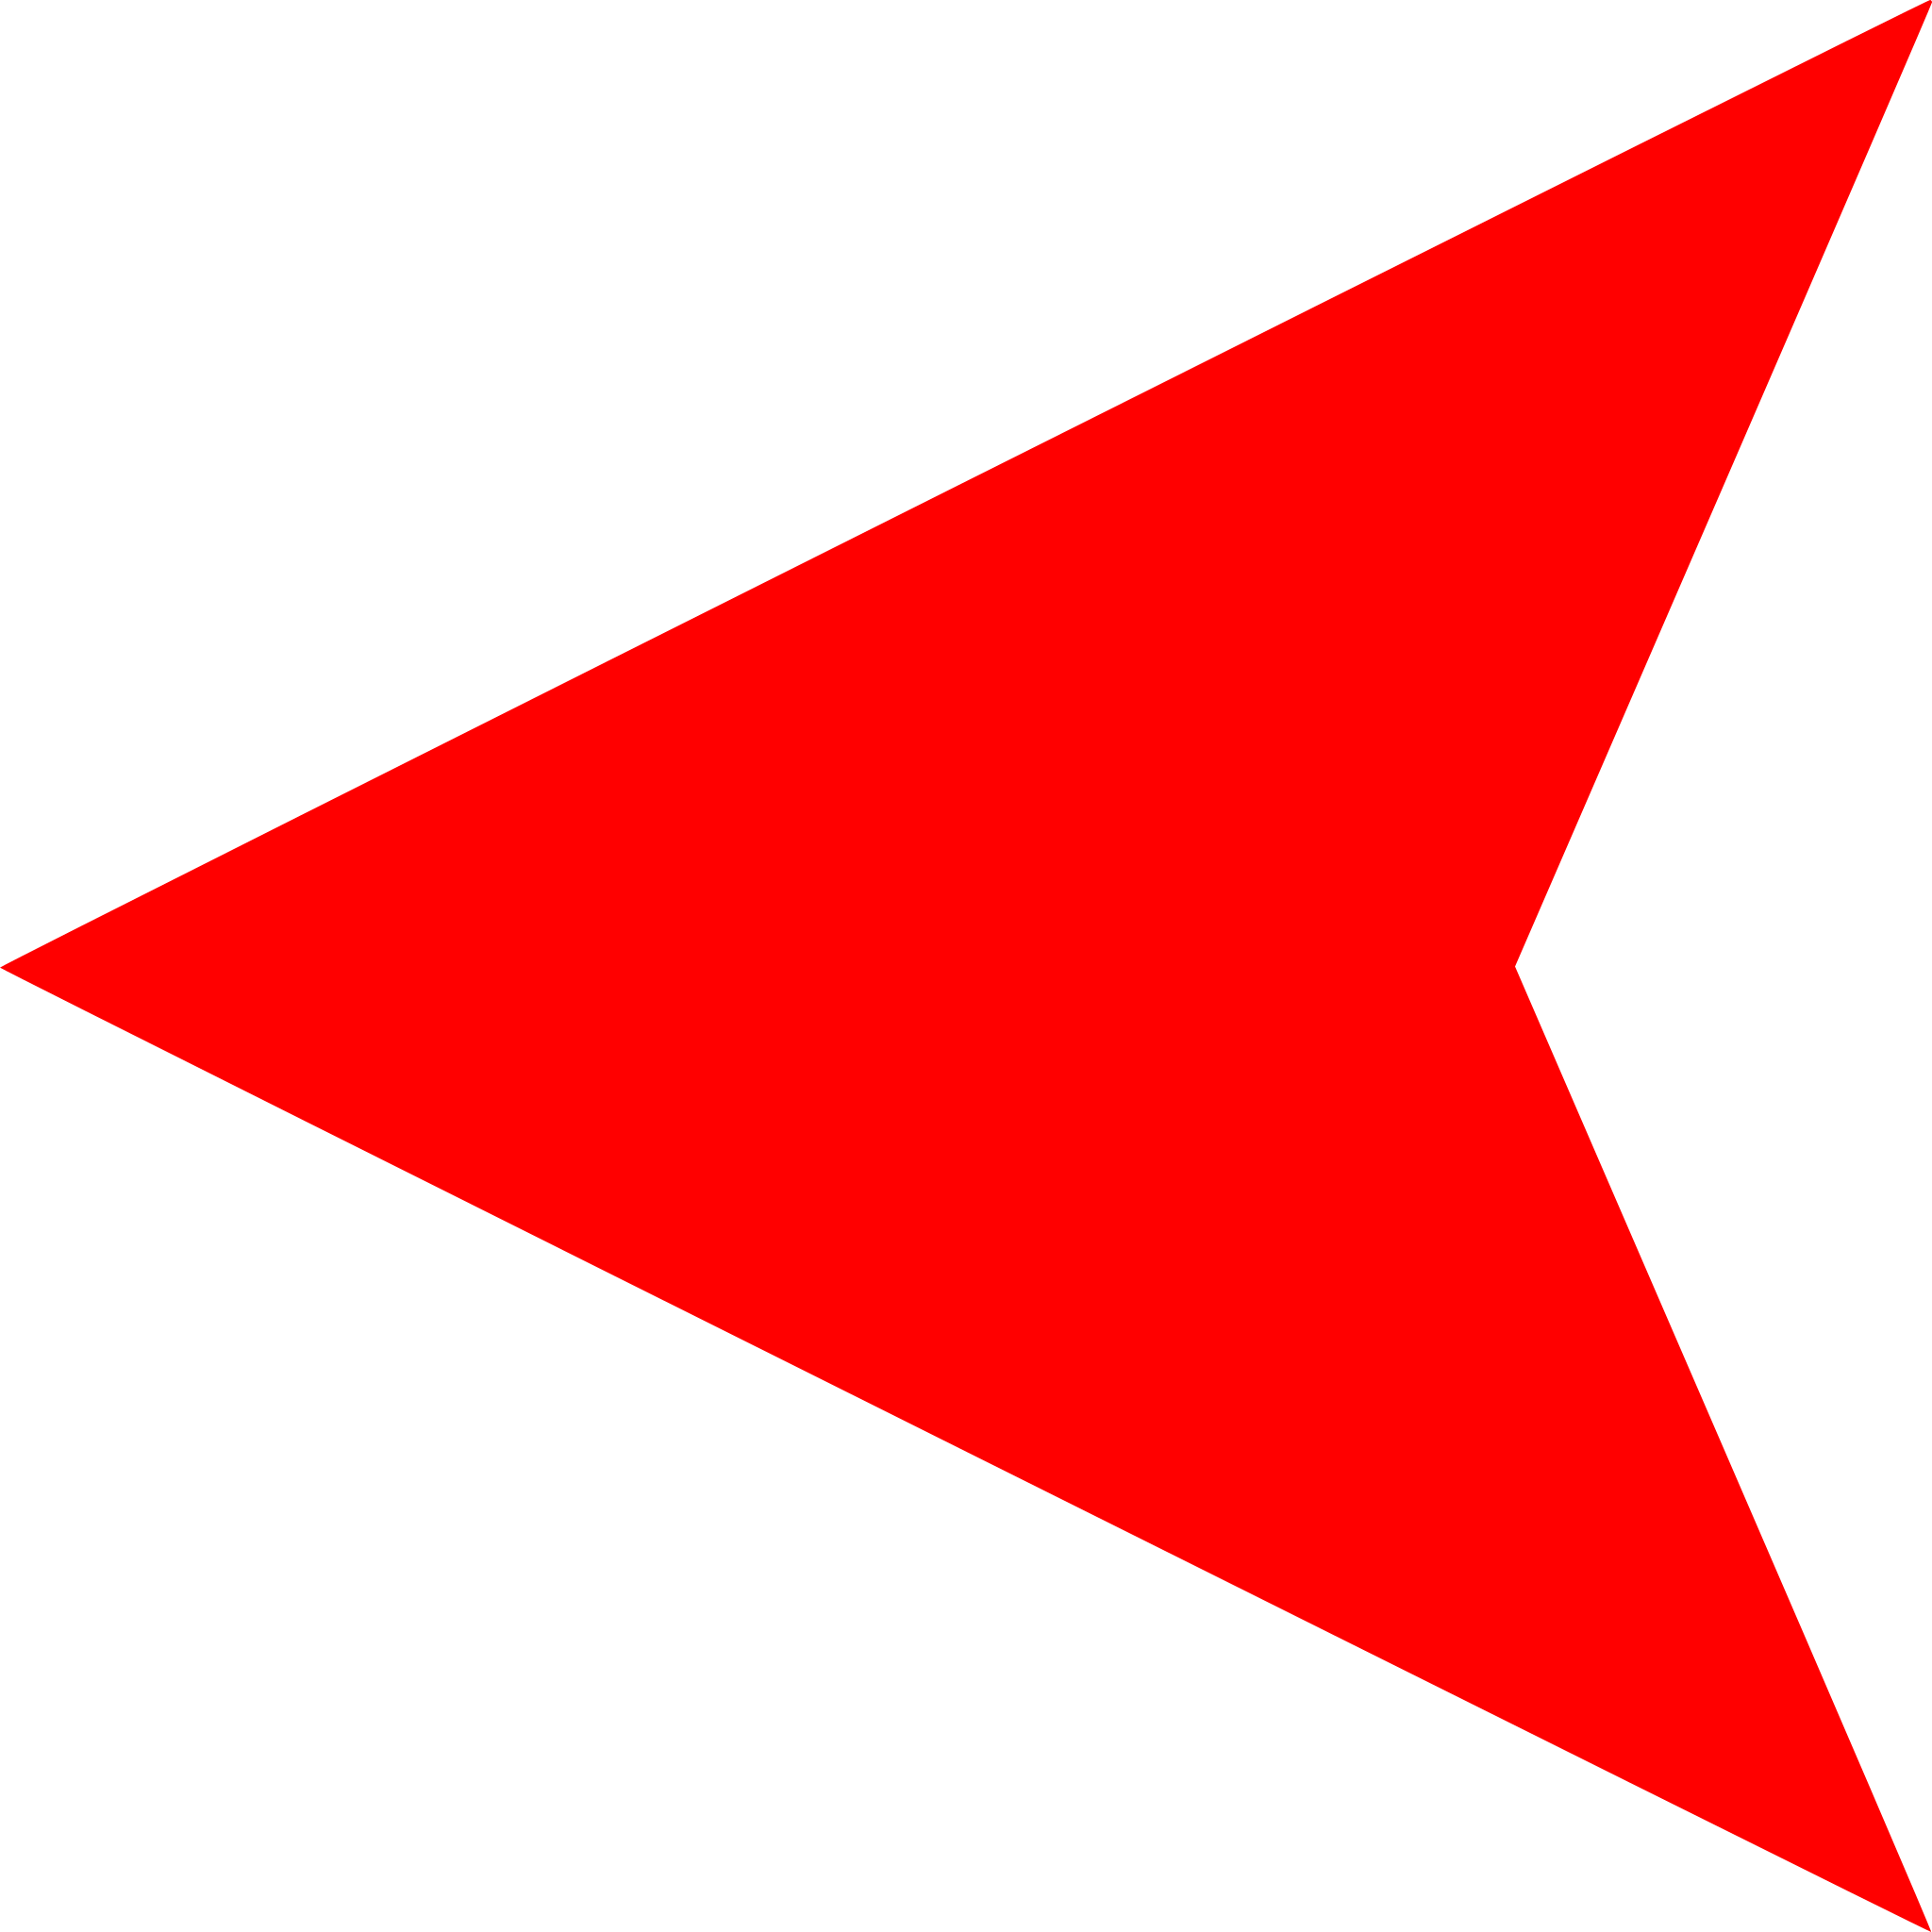 File:Red Arrow Left.svg - Wikipedia